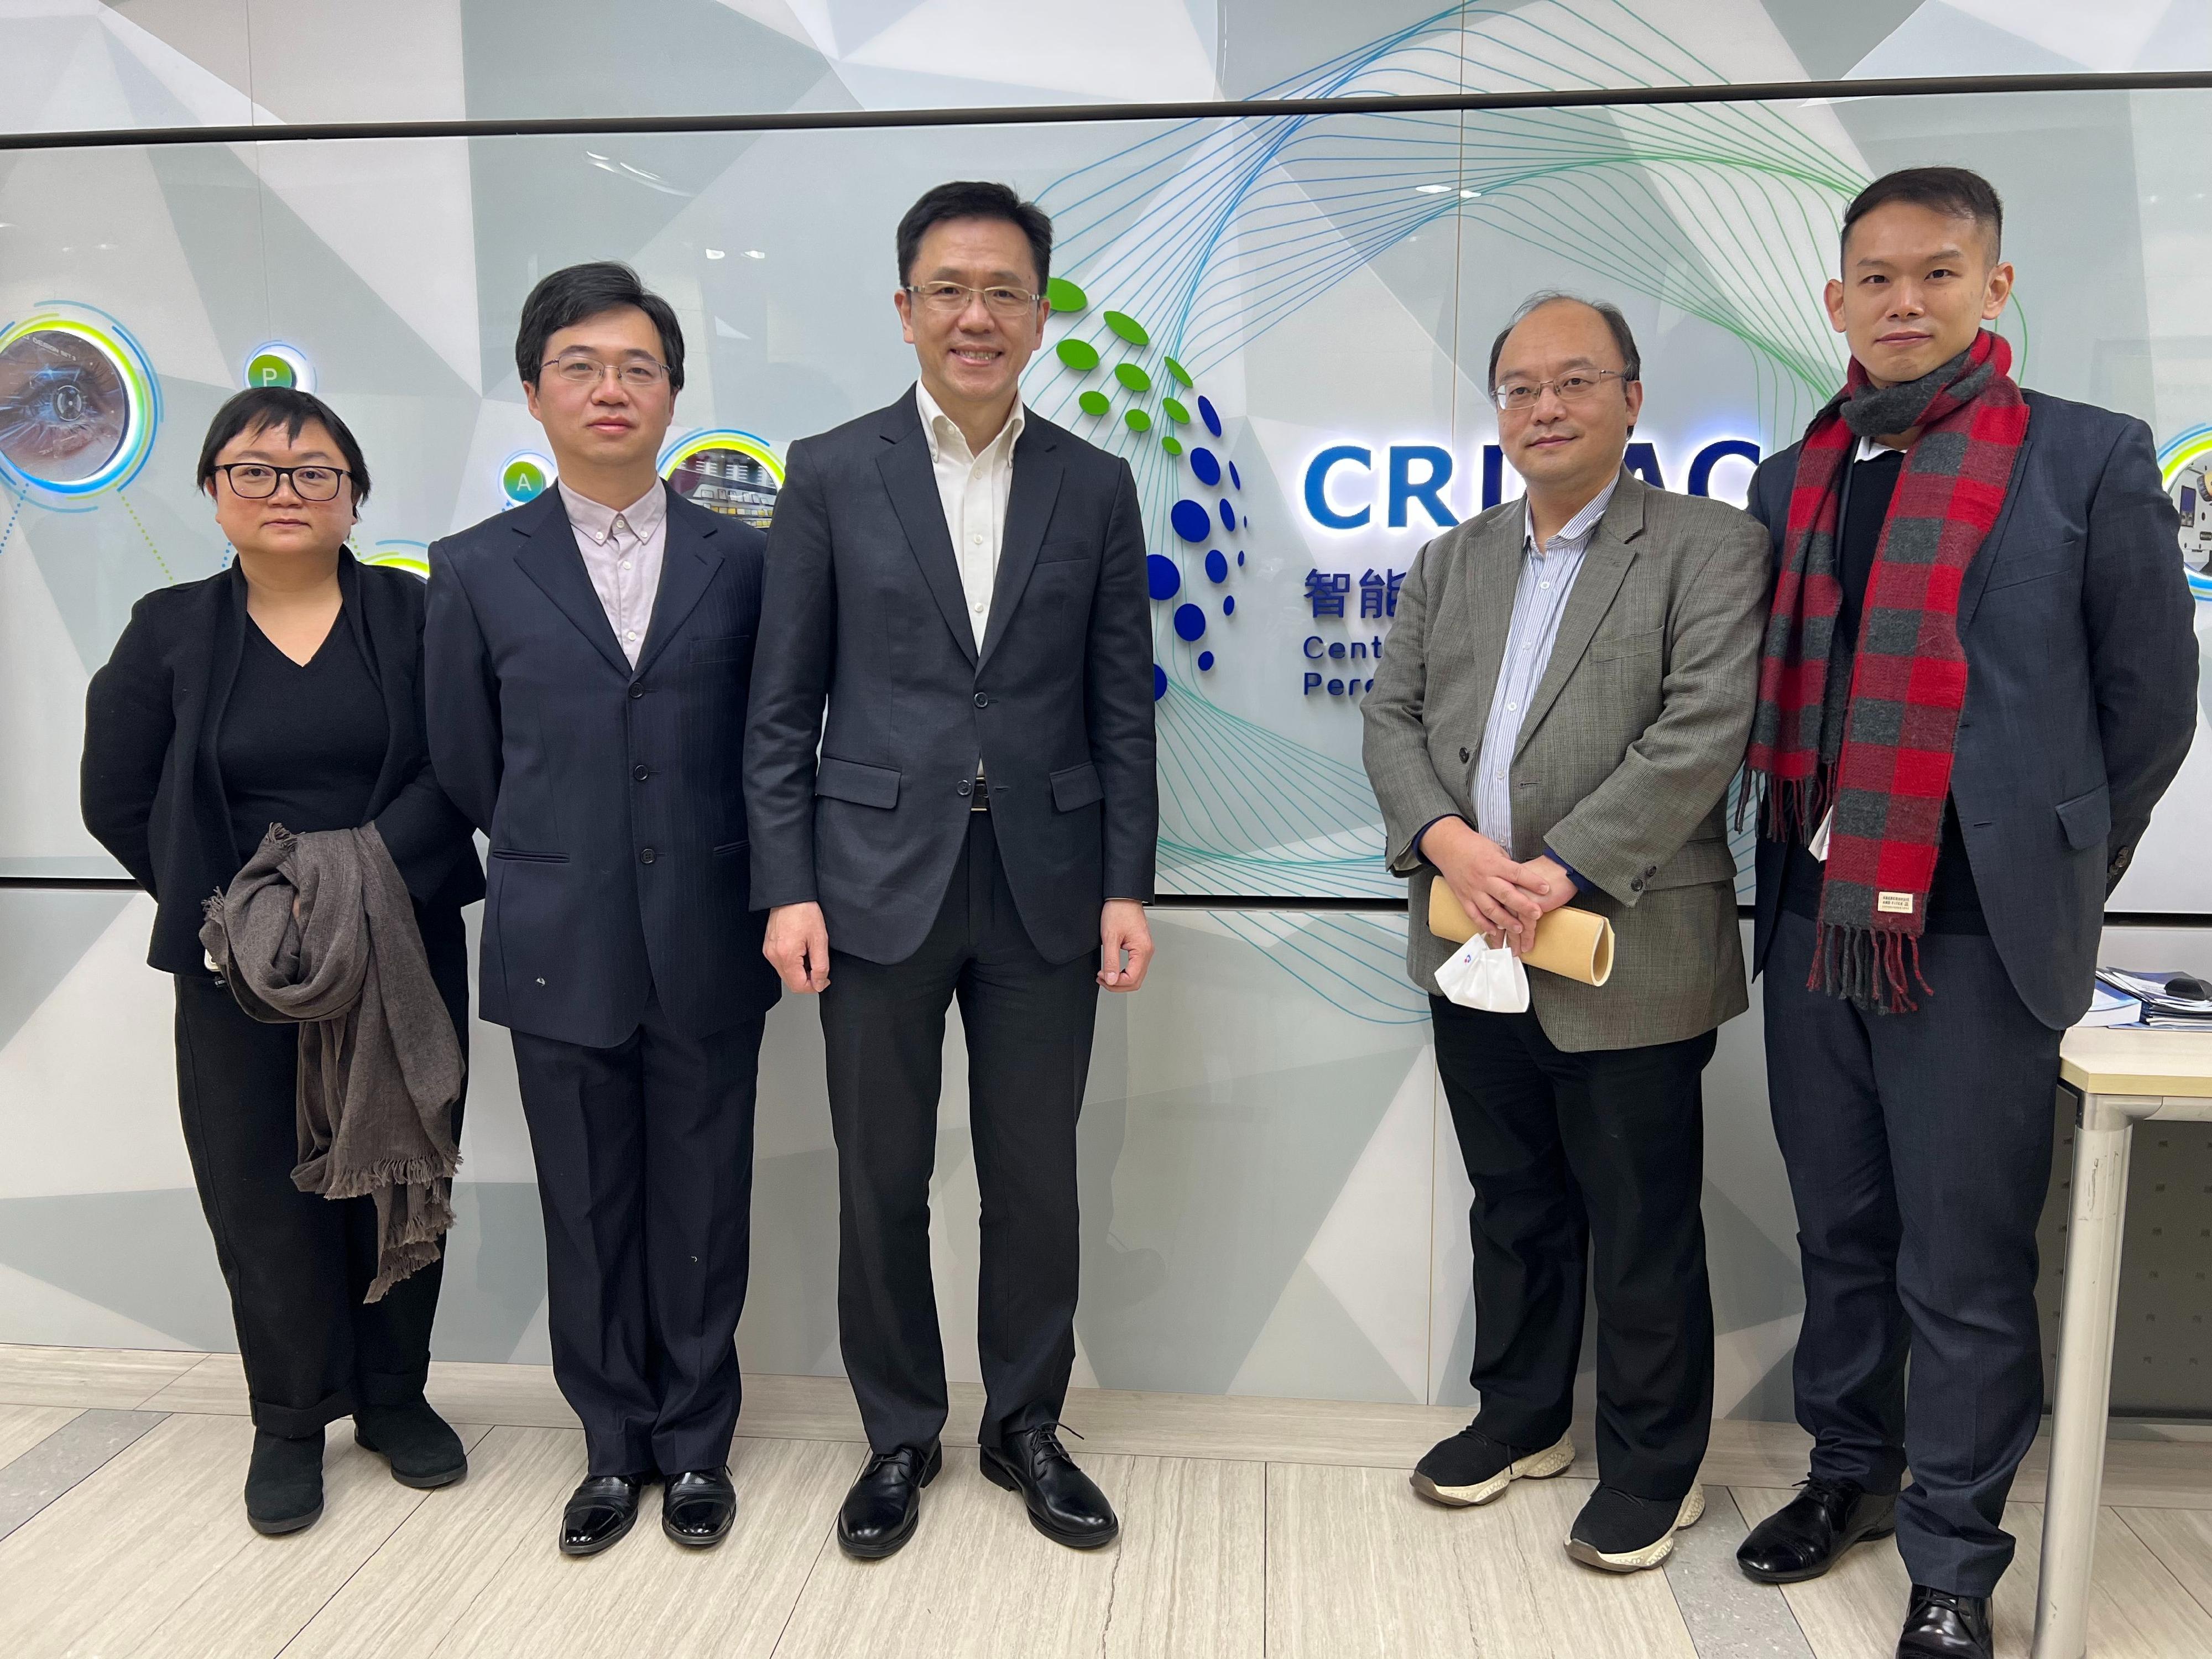 The Secretary for Innovation, Technology and Industry, Professor Sun Dong (middle), visits the Center for Research on Intelligent Perception and Computing in Beijing today (January 16), and is pictured with the Deputy President of the Institute of Automation of the Chinese Academy of Sciences, Mr Zeng Dajun (second right).